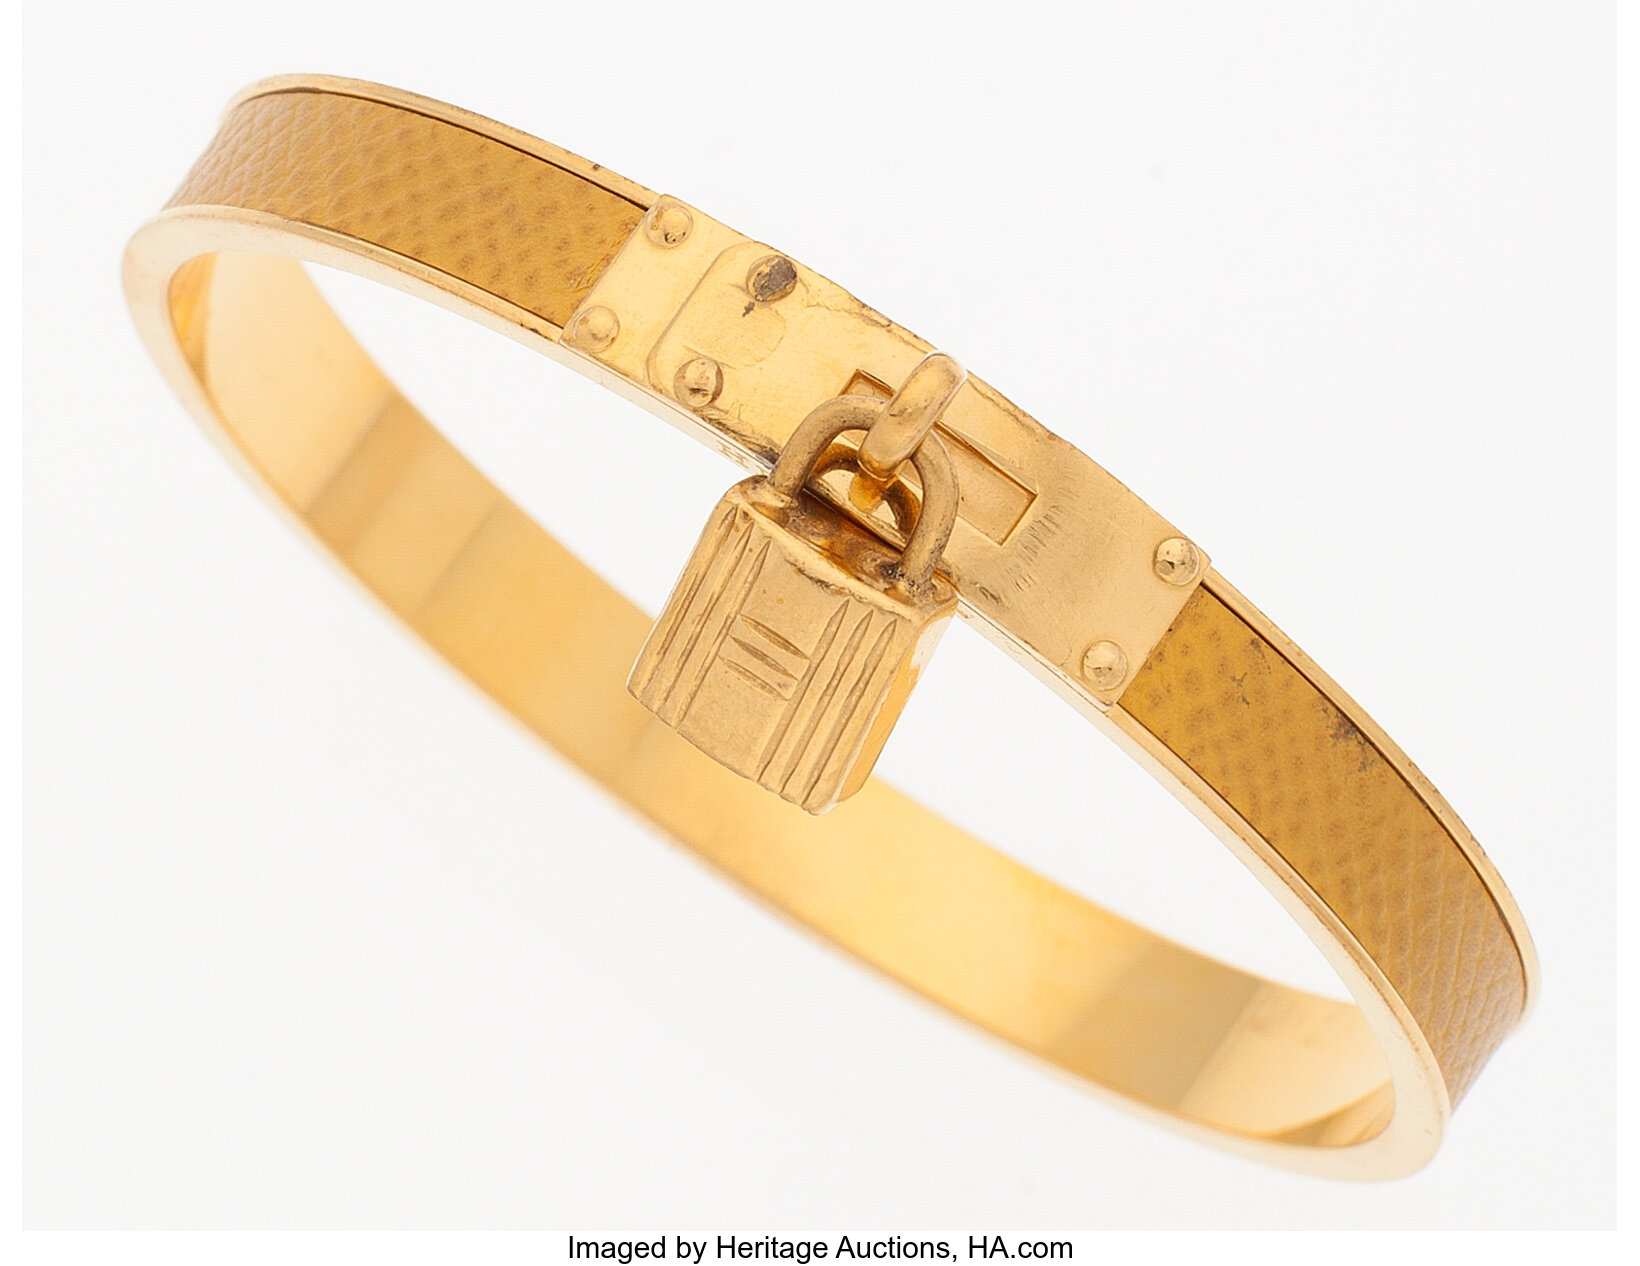 Jaune d'Or Courchevel Banana Kelly Belt Gold Hardware, 1996, Handbags and  Accessories, 2023